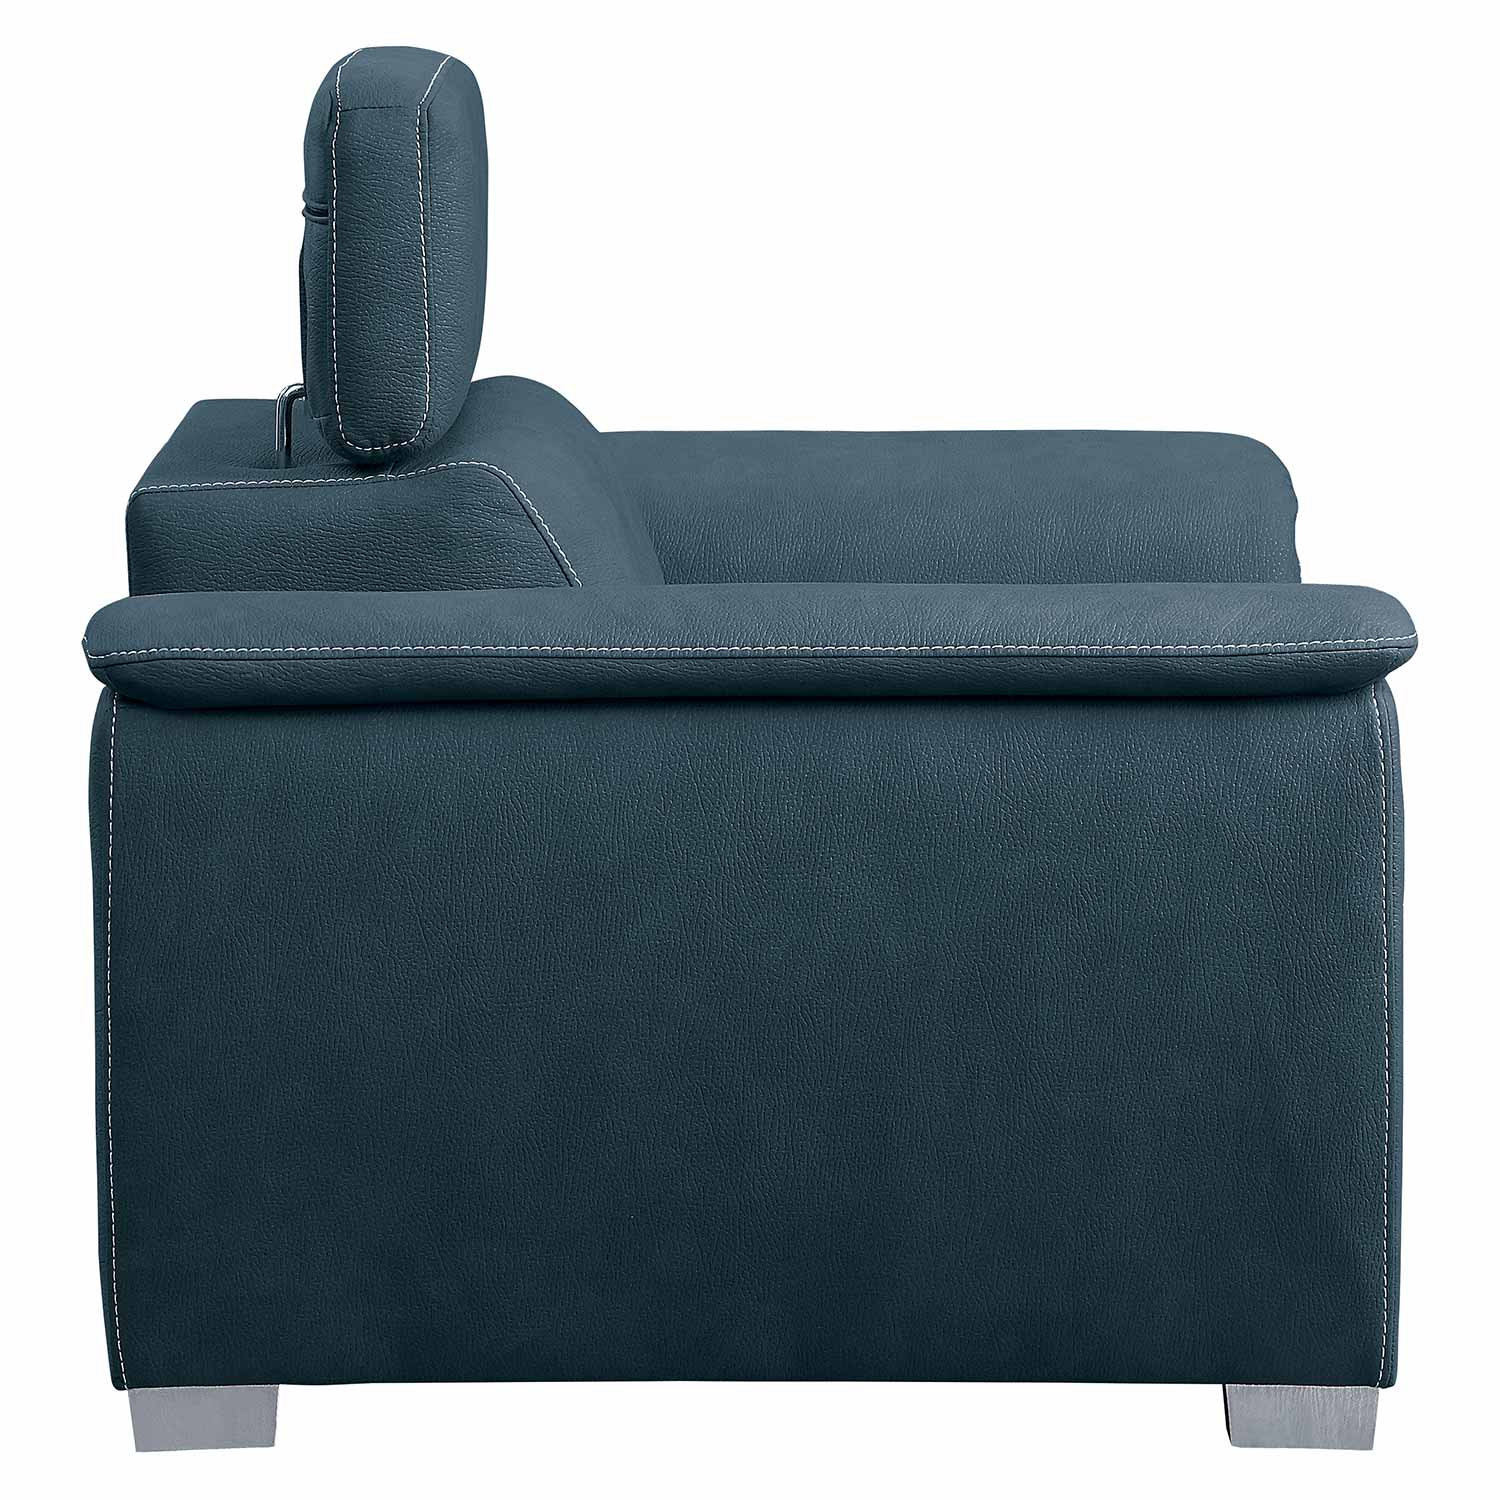 Homelegance Ferriday Chair with Pull-out Ottoman - Blue